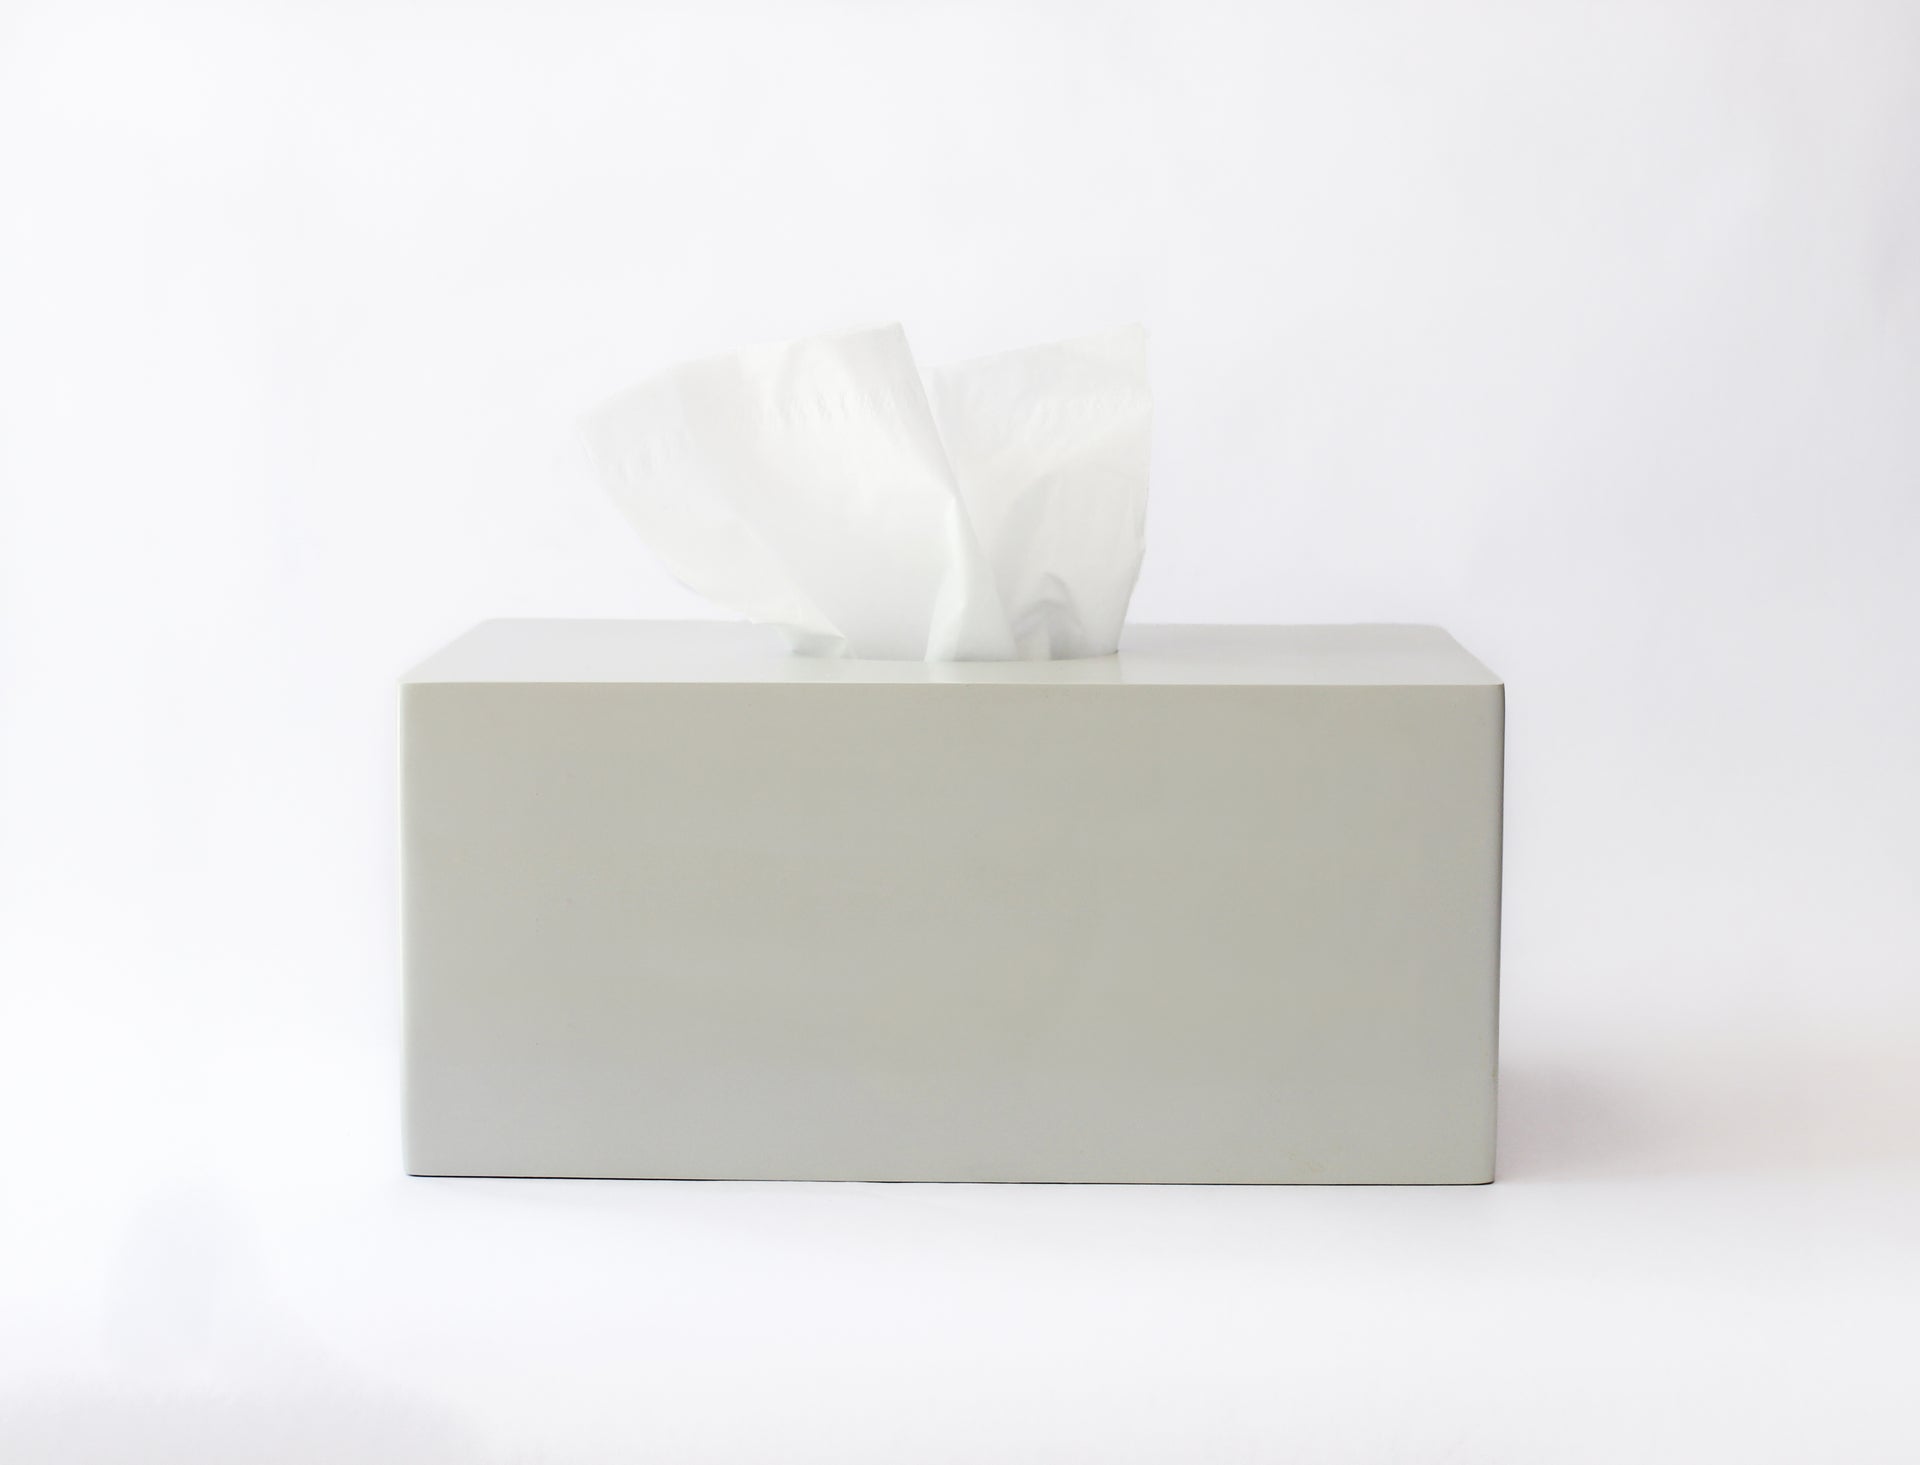 Load video: The large tissue box cover in stone. Sturdy, simple, and stylish.